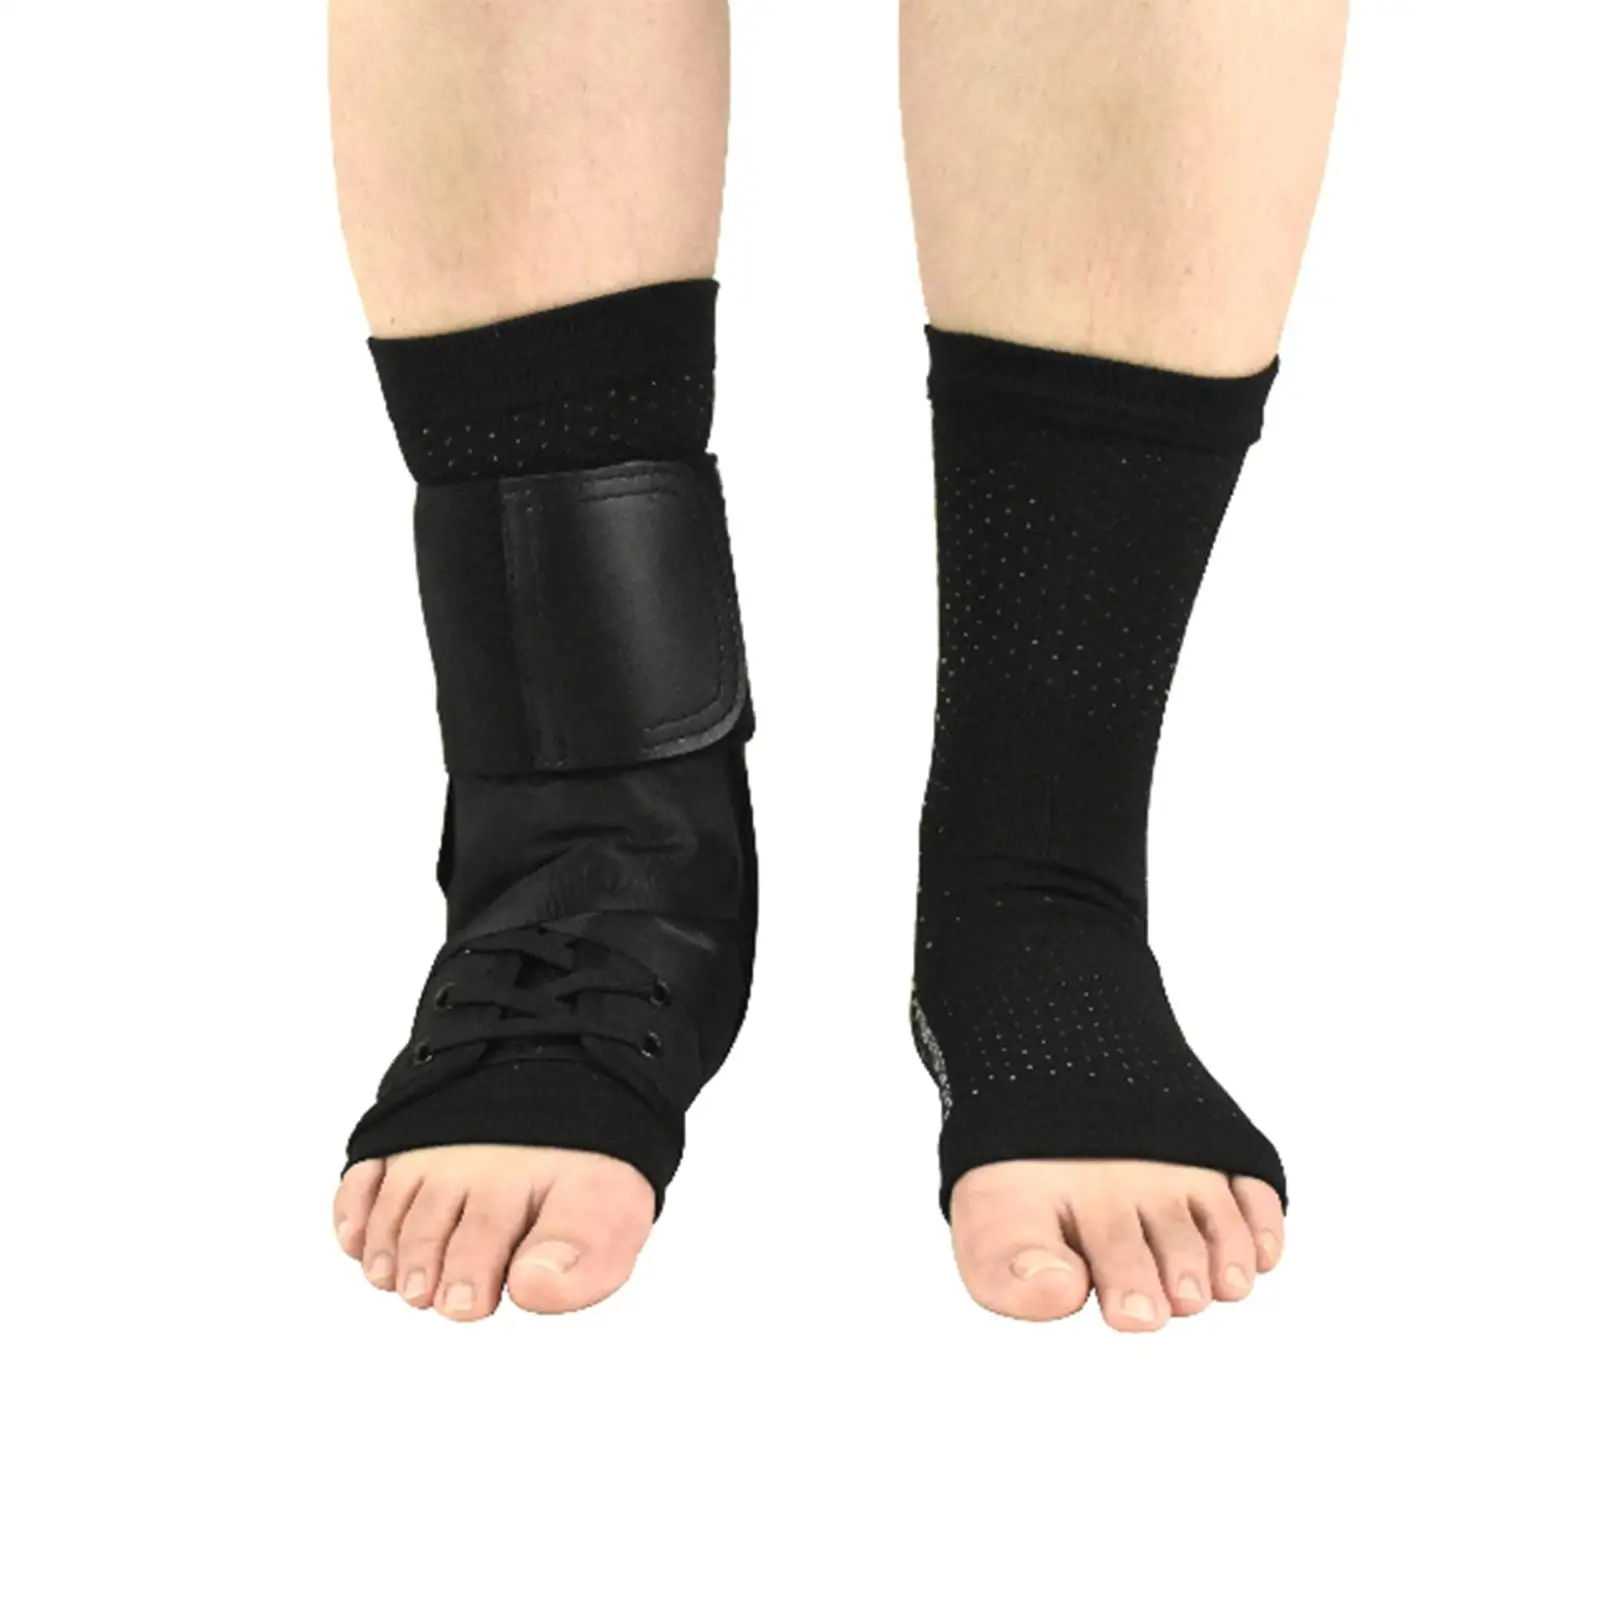 Ankle Brace Suppor Compression Socks Sleeve Pain for Running Soccer Football